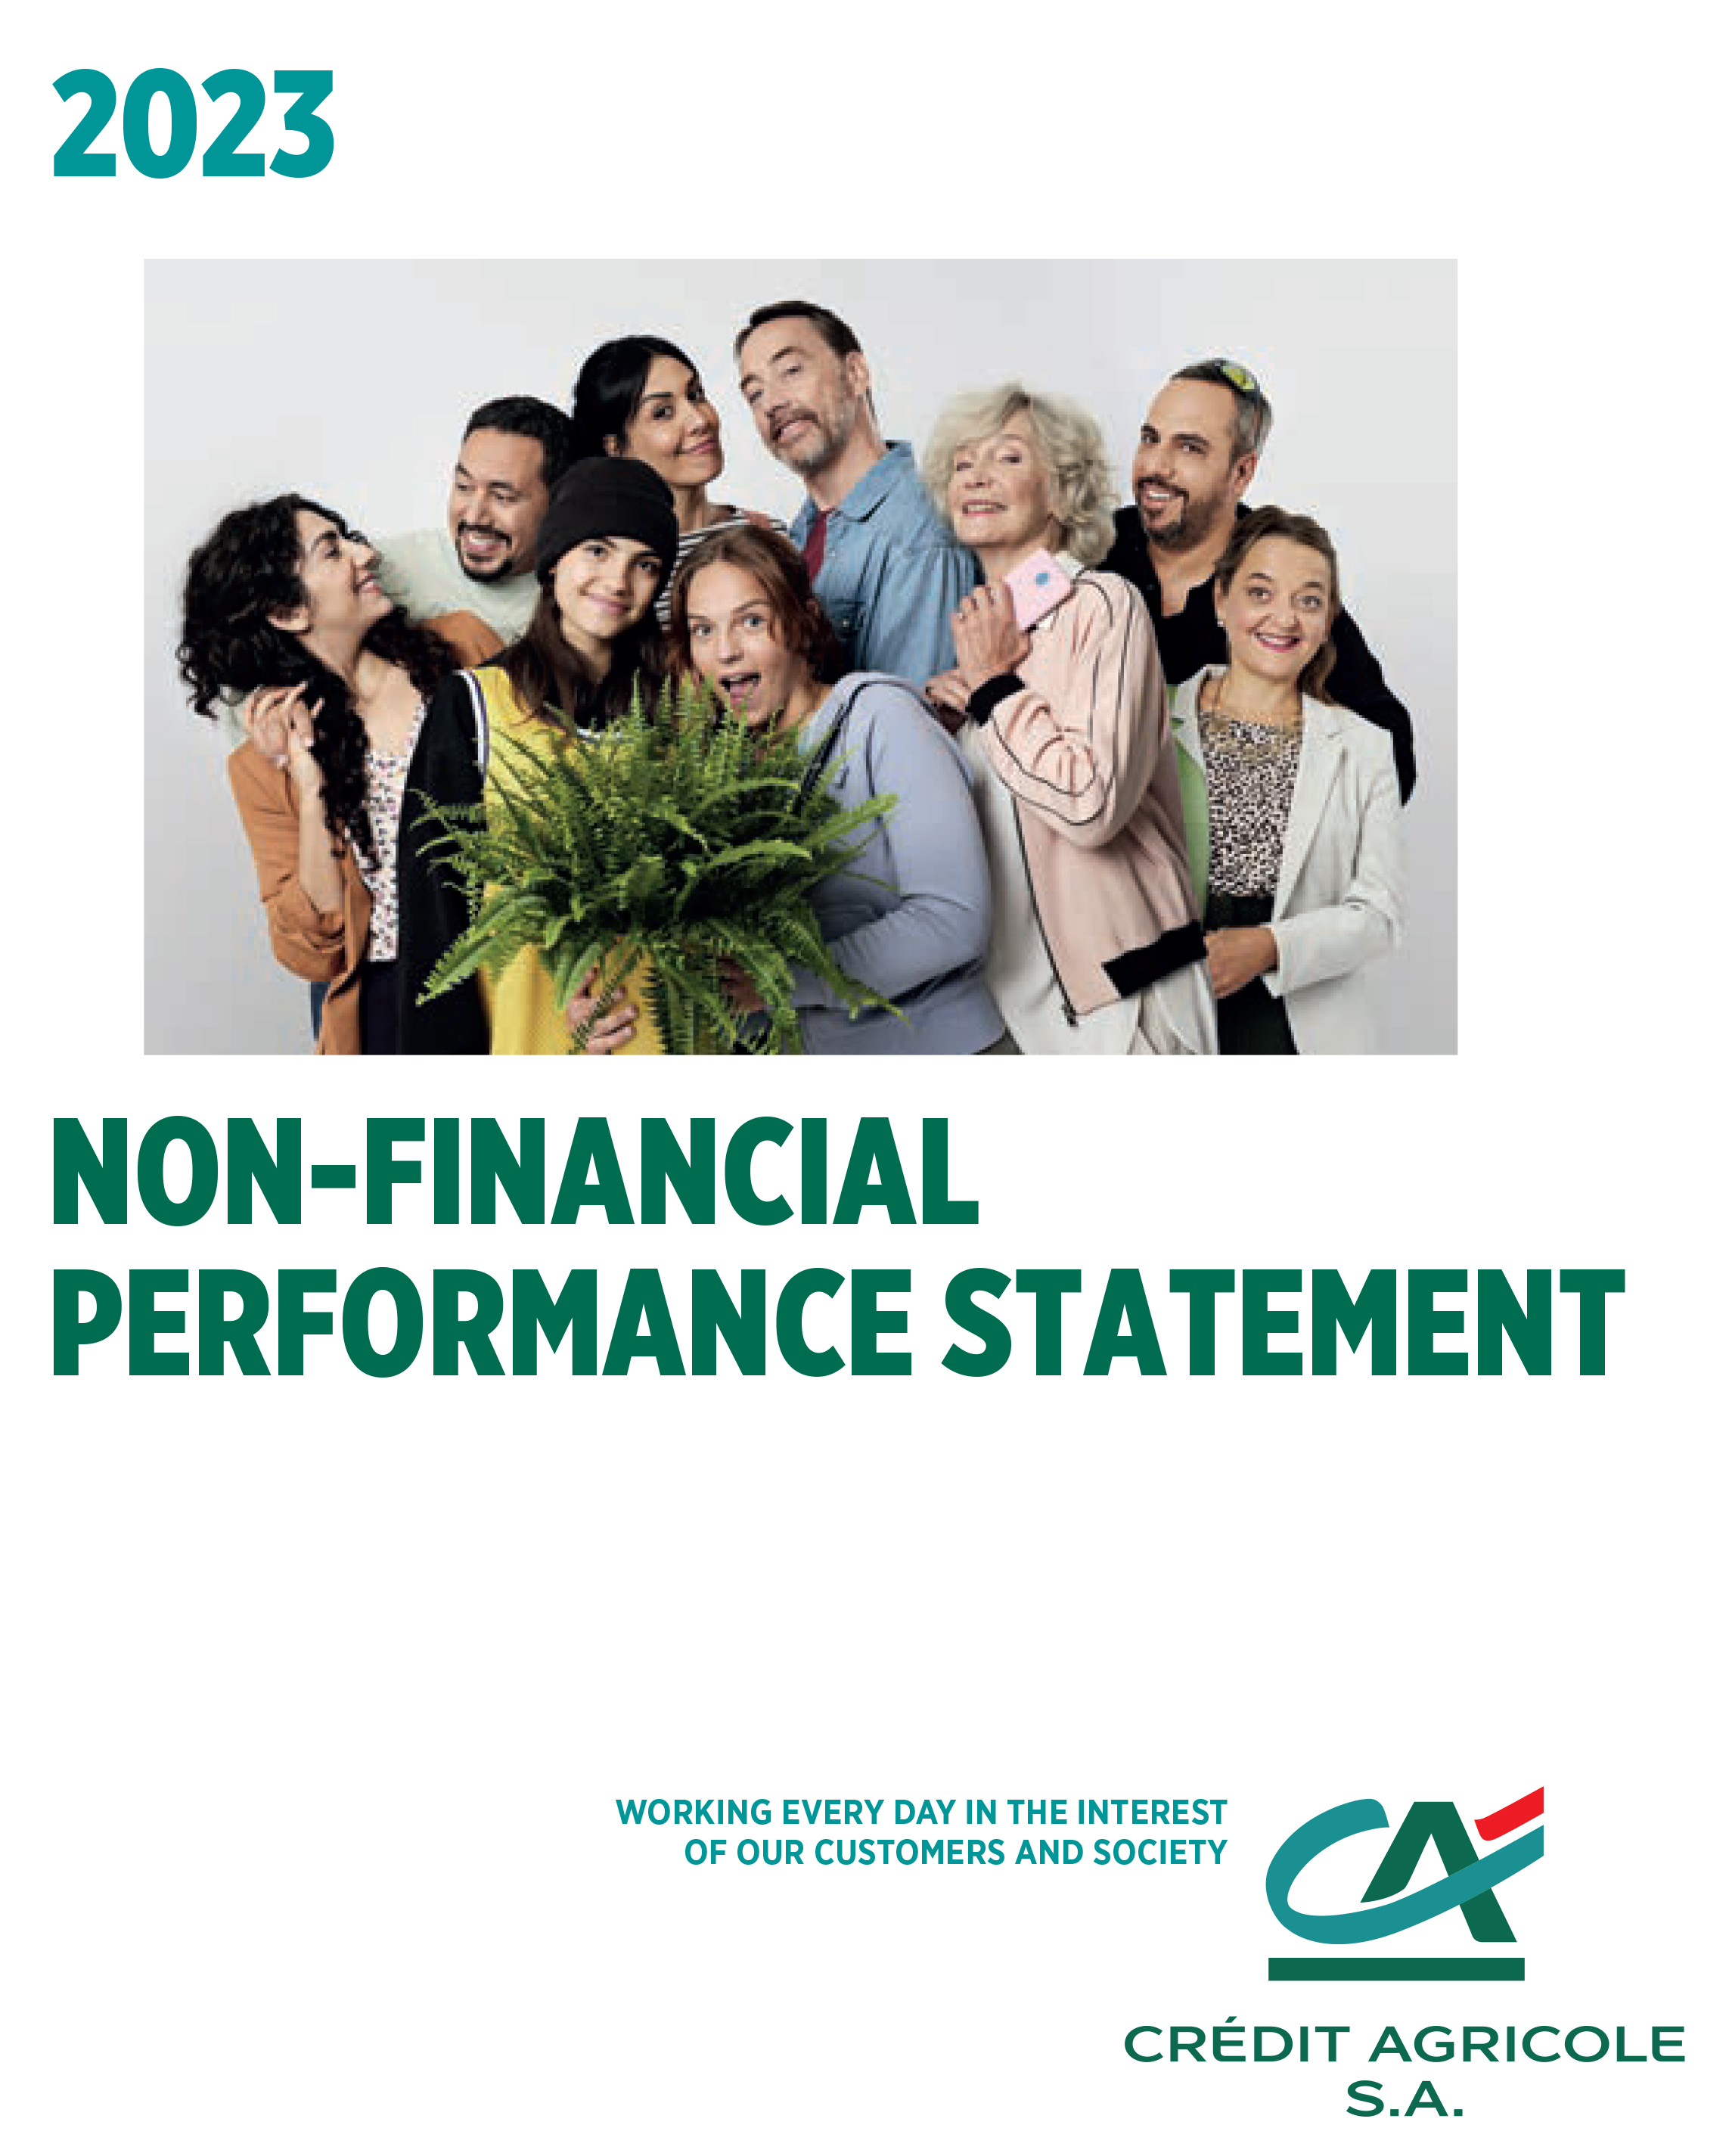 Extra-Financial Performance Statement (EFPS) - 2023